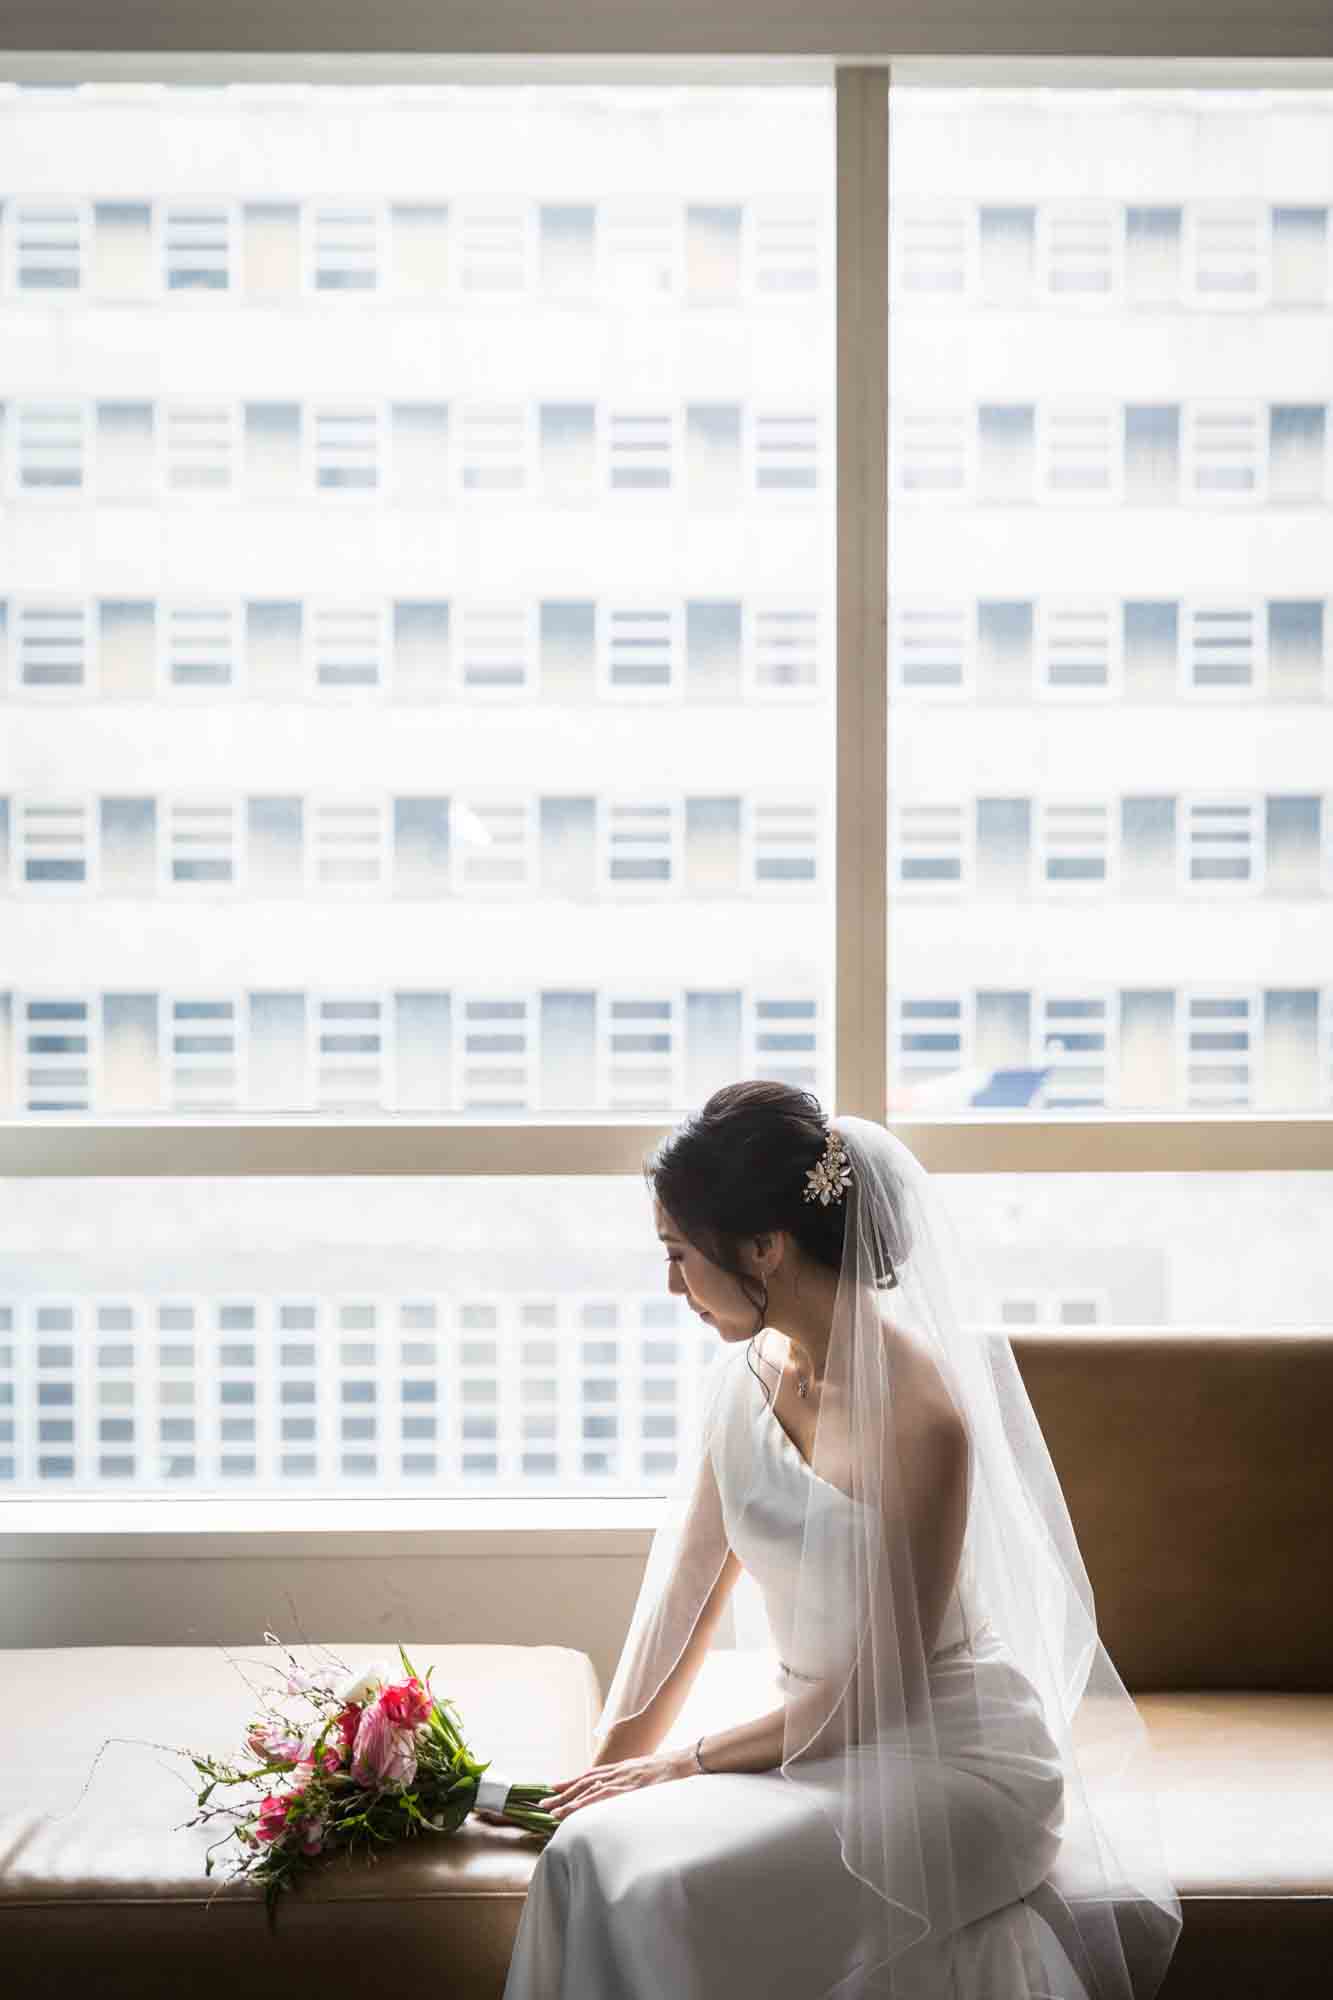 Bride sitting on couch with flowers and looking out window